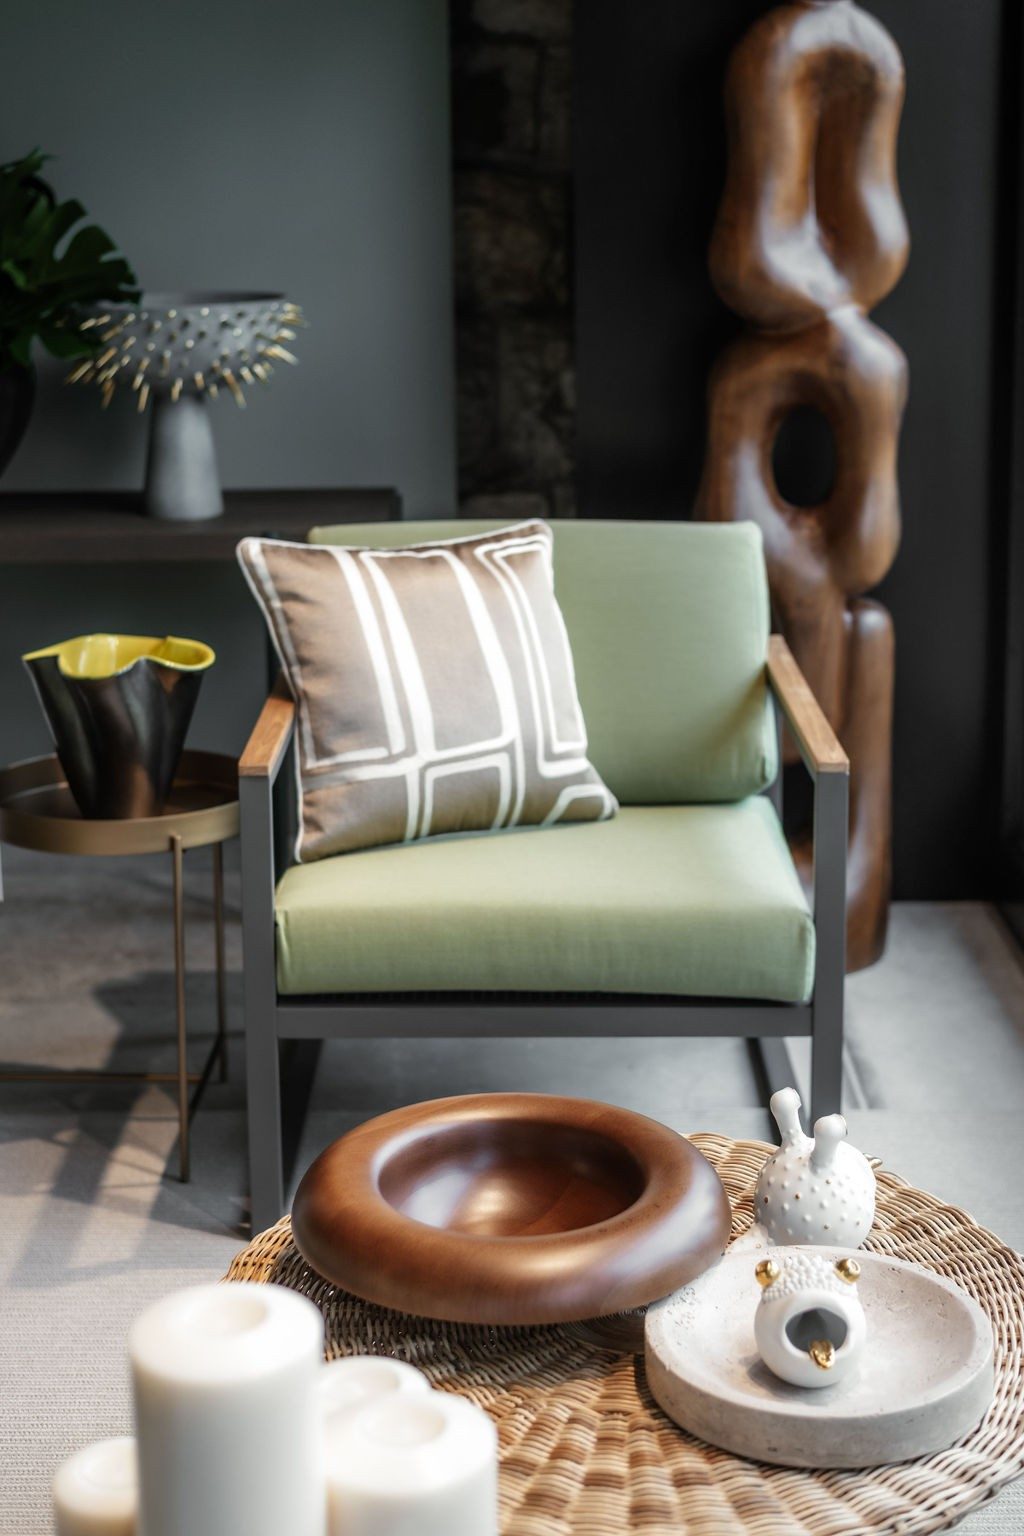 A green armchair with a cushion stands behind a round, braided coffee table. On the table are bowls and decorative items. One of the decorative items looks like a frog head with a golden tongue and golden eyes. Behind the armchair are two decorative items: a chain-like wooden sculpture and a decorative element with pointed elements.